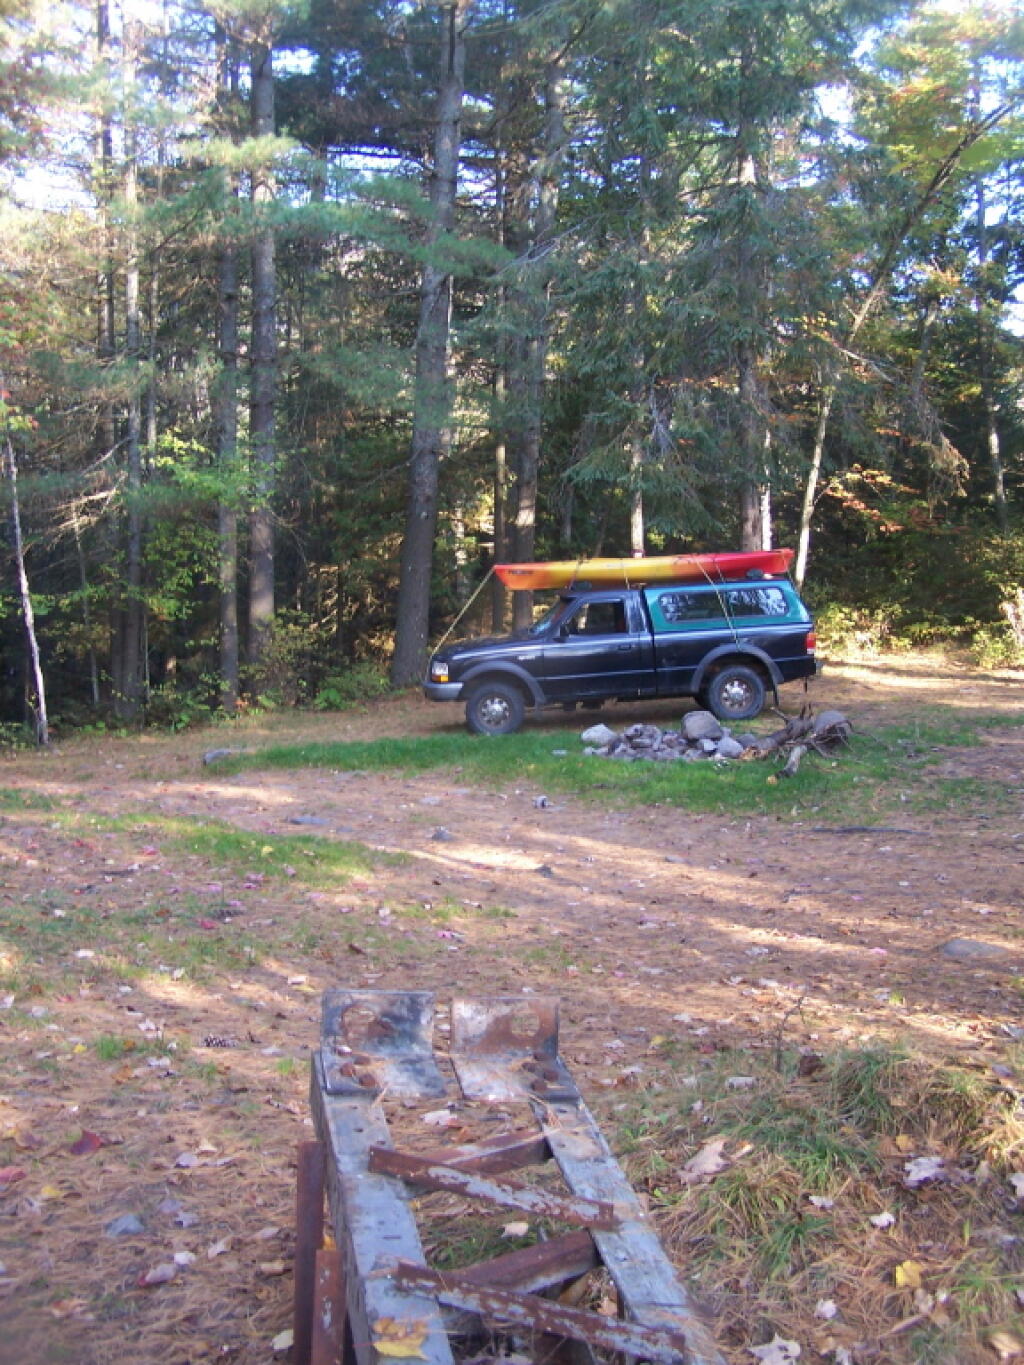 All Packed Up at Union Falls Campsite